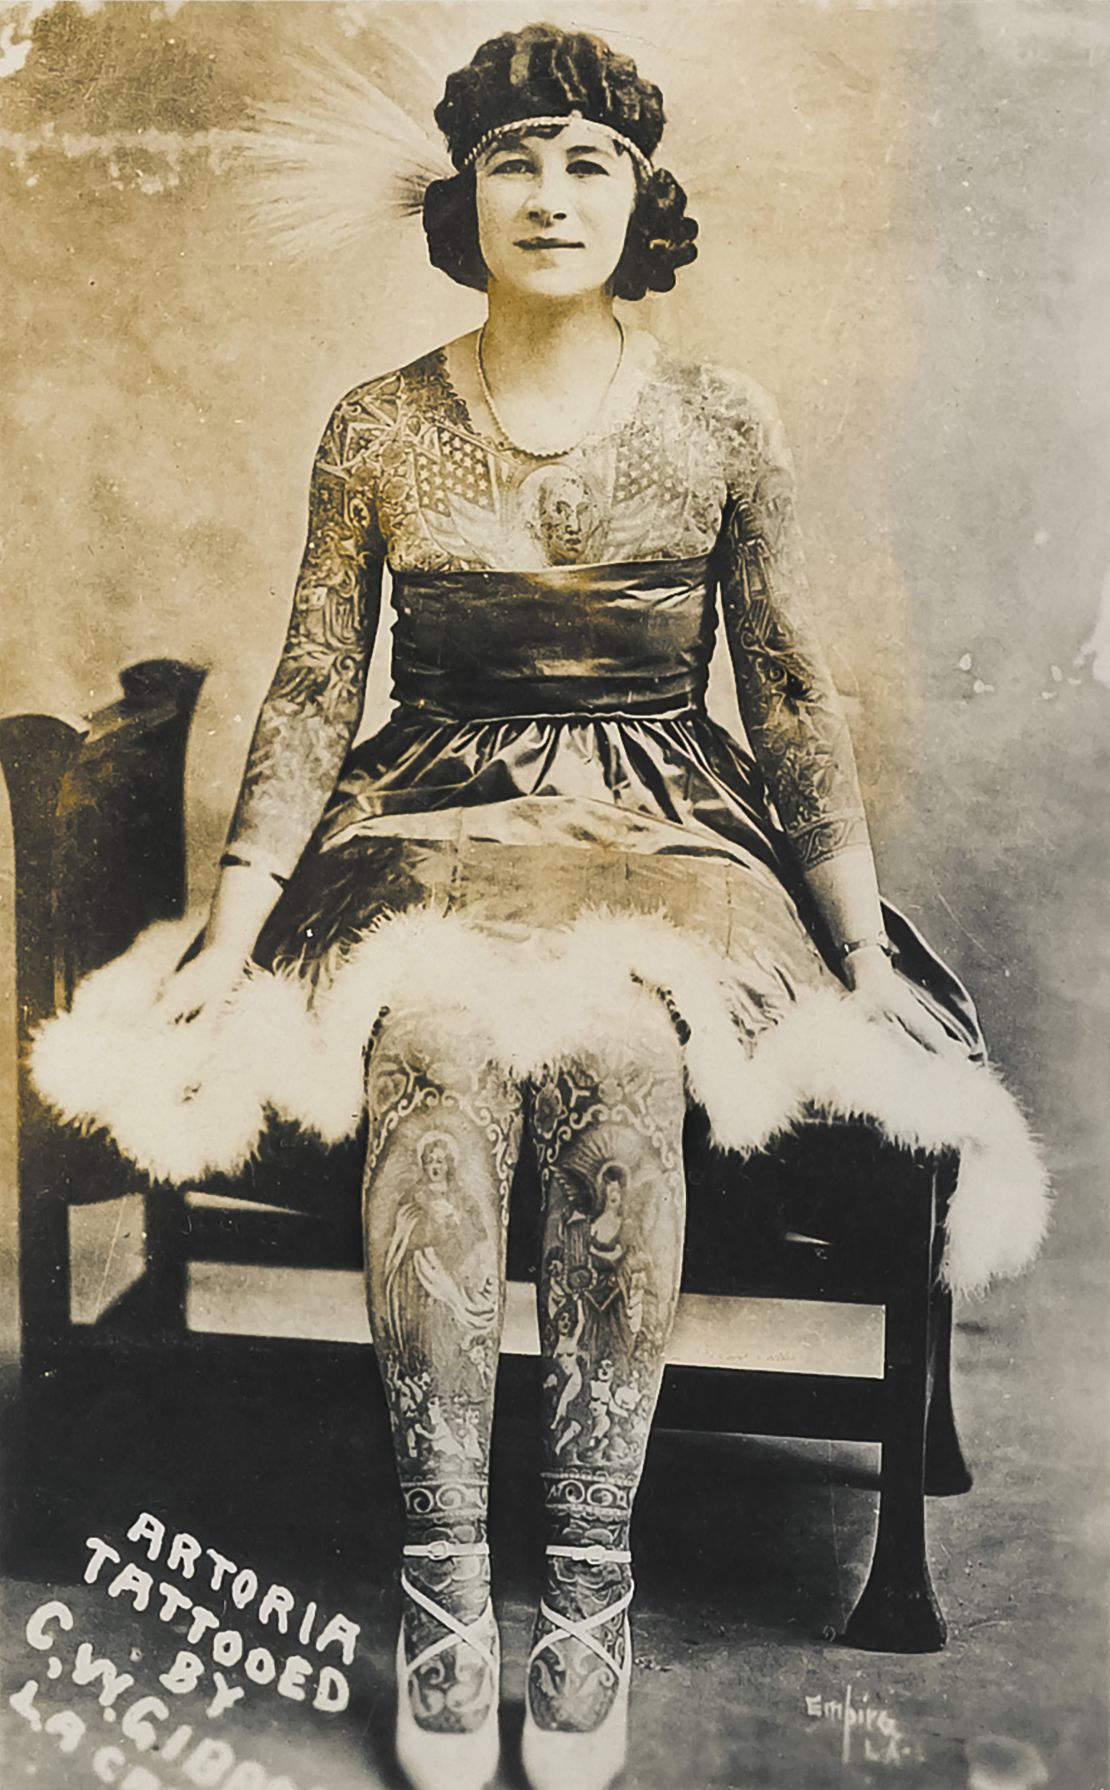 This photograph of tattooed peformer Artoria Gibbons was taken in the 1920s. Gibbons worked for circus sideshows, dime museums and carnivals for decades.